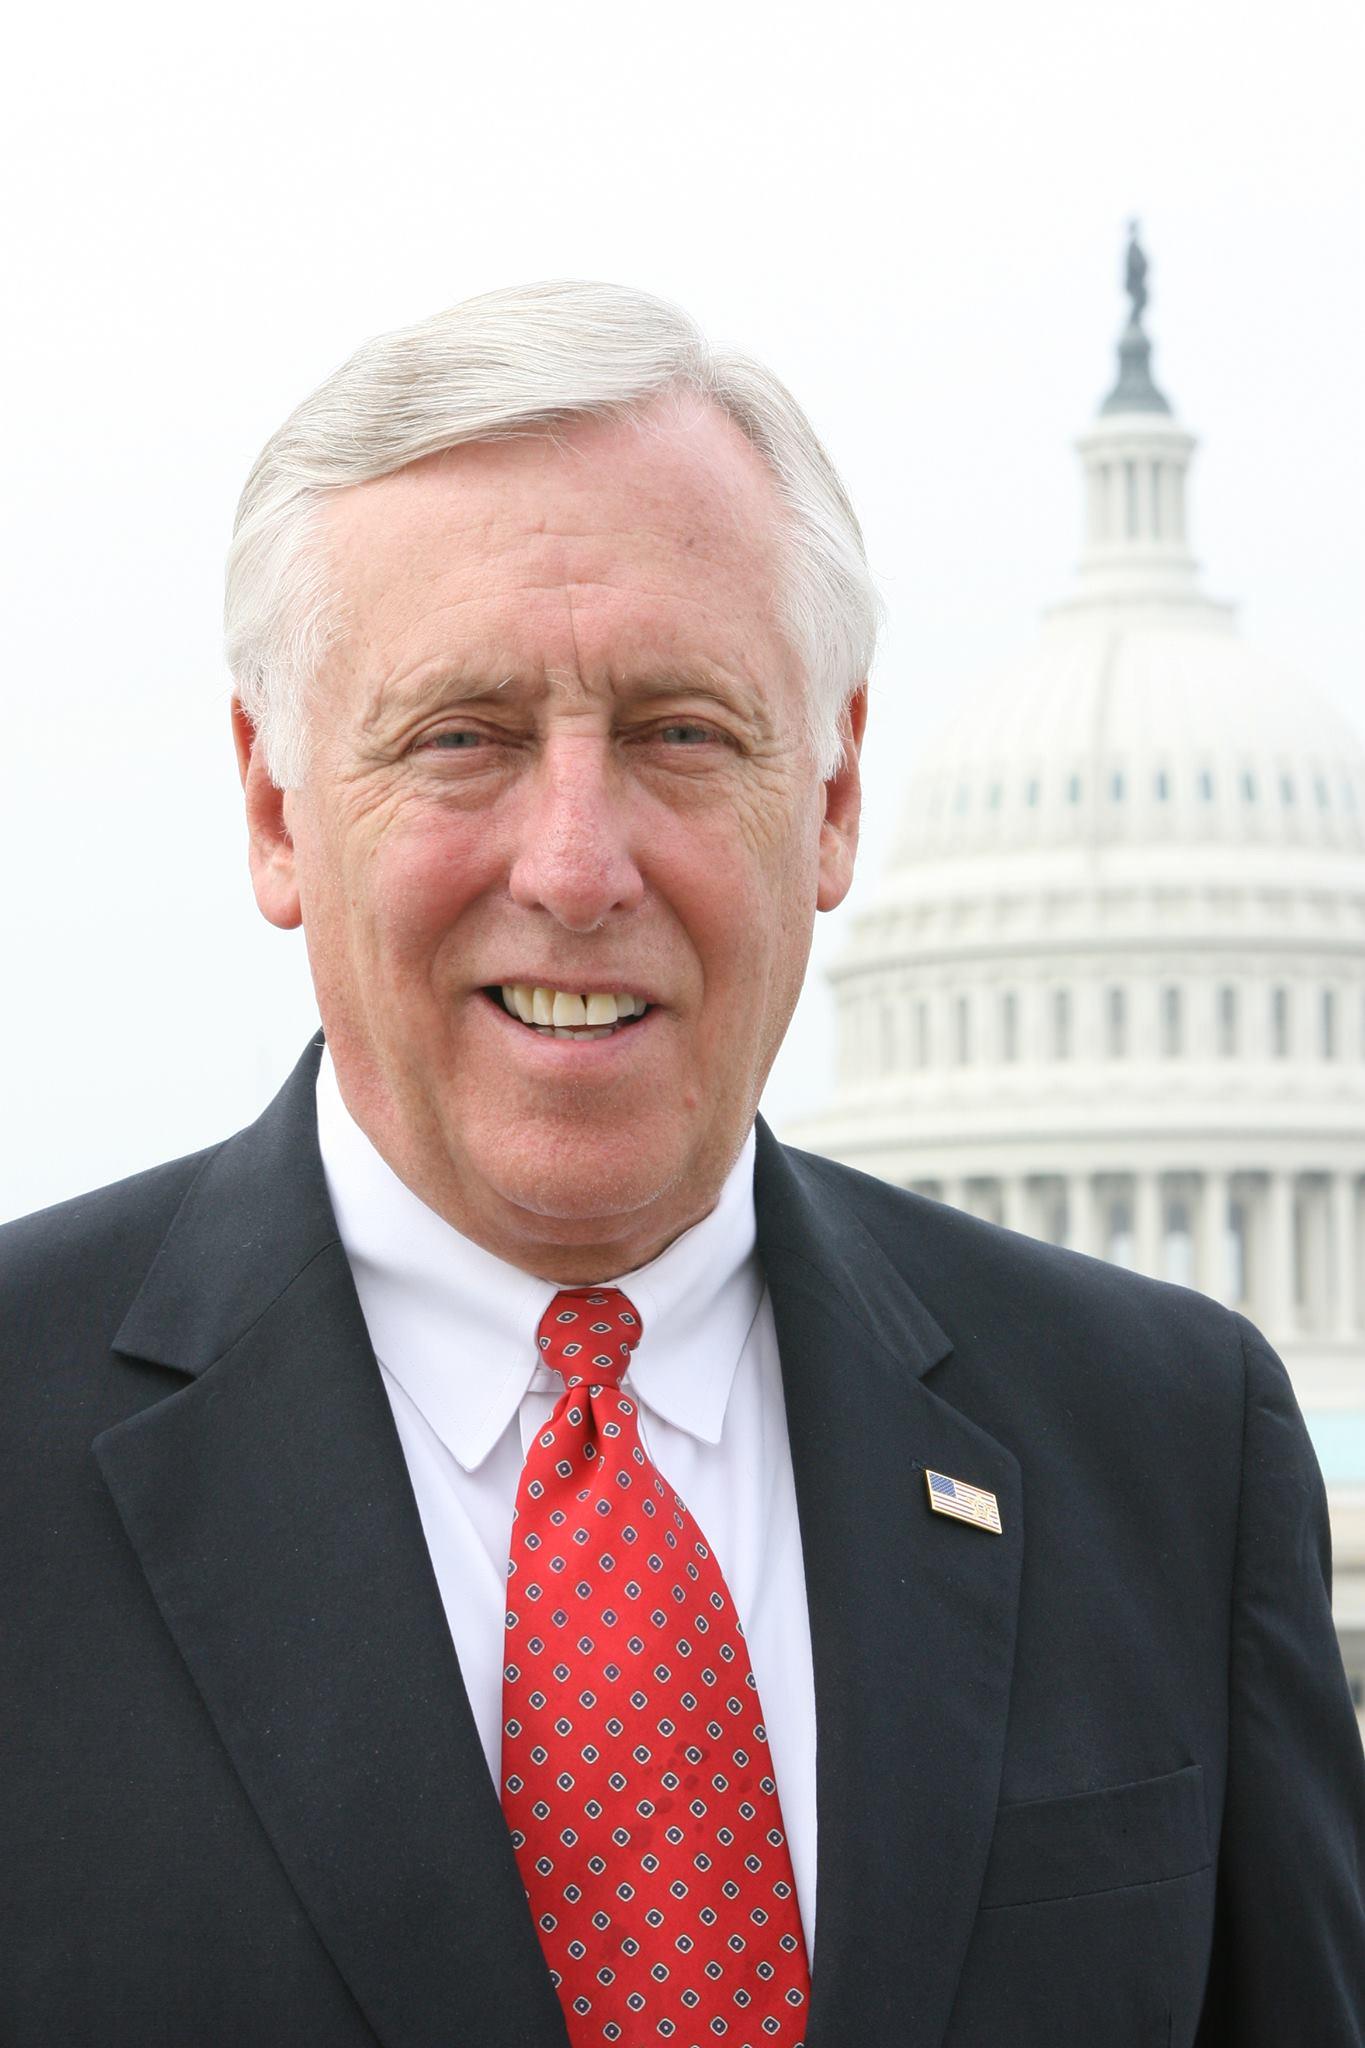 Rep. Steny Hoyer on the House Impeachment Inquiry and the Partisan